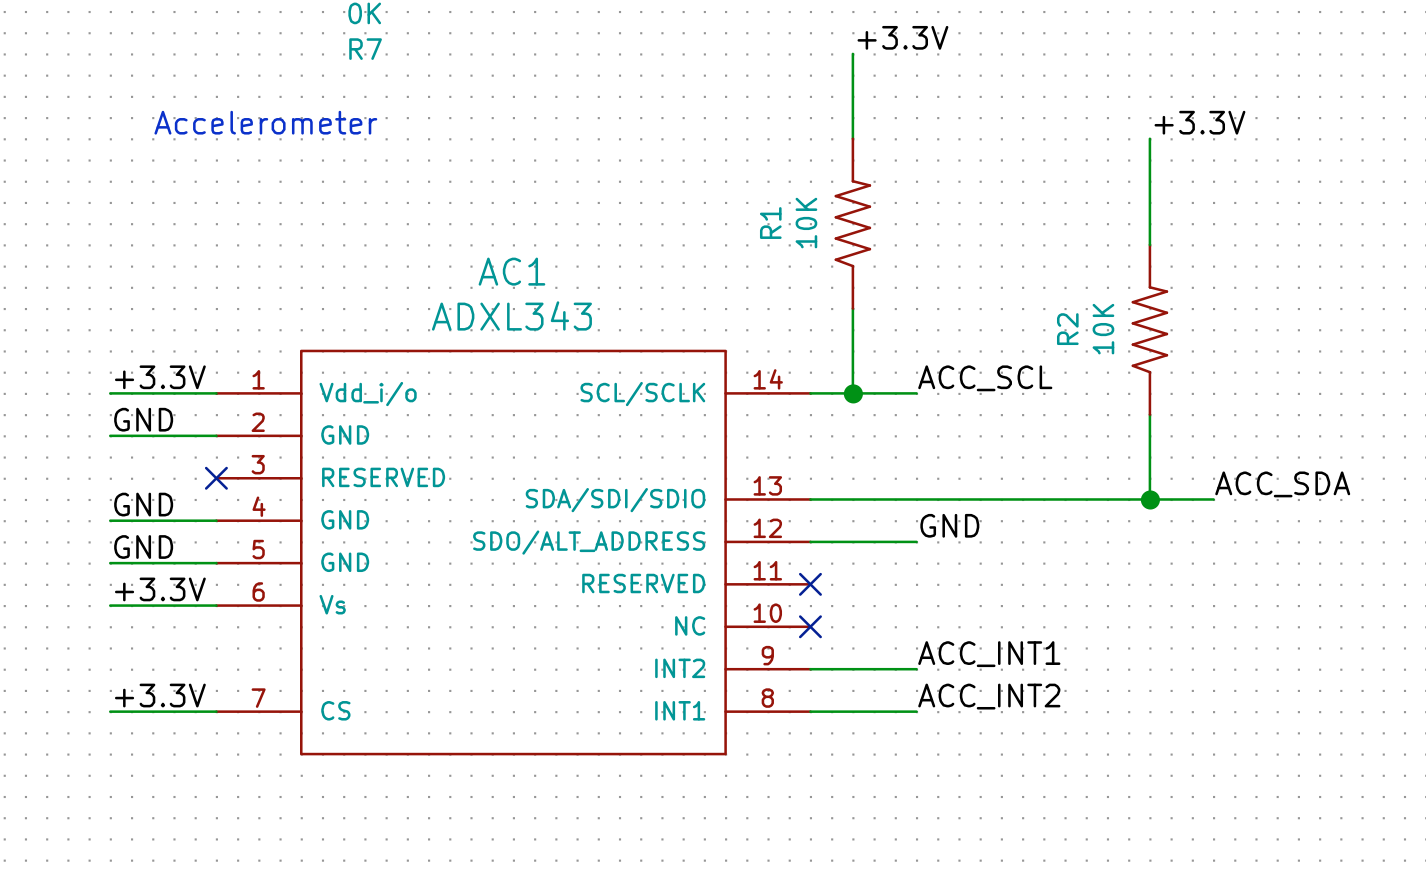 Connected pins for the accelerometer